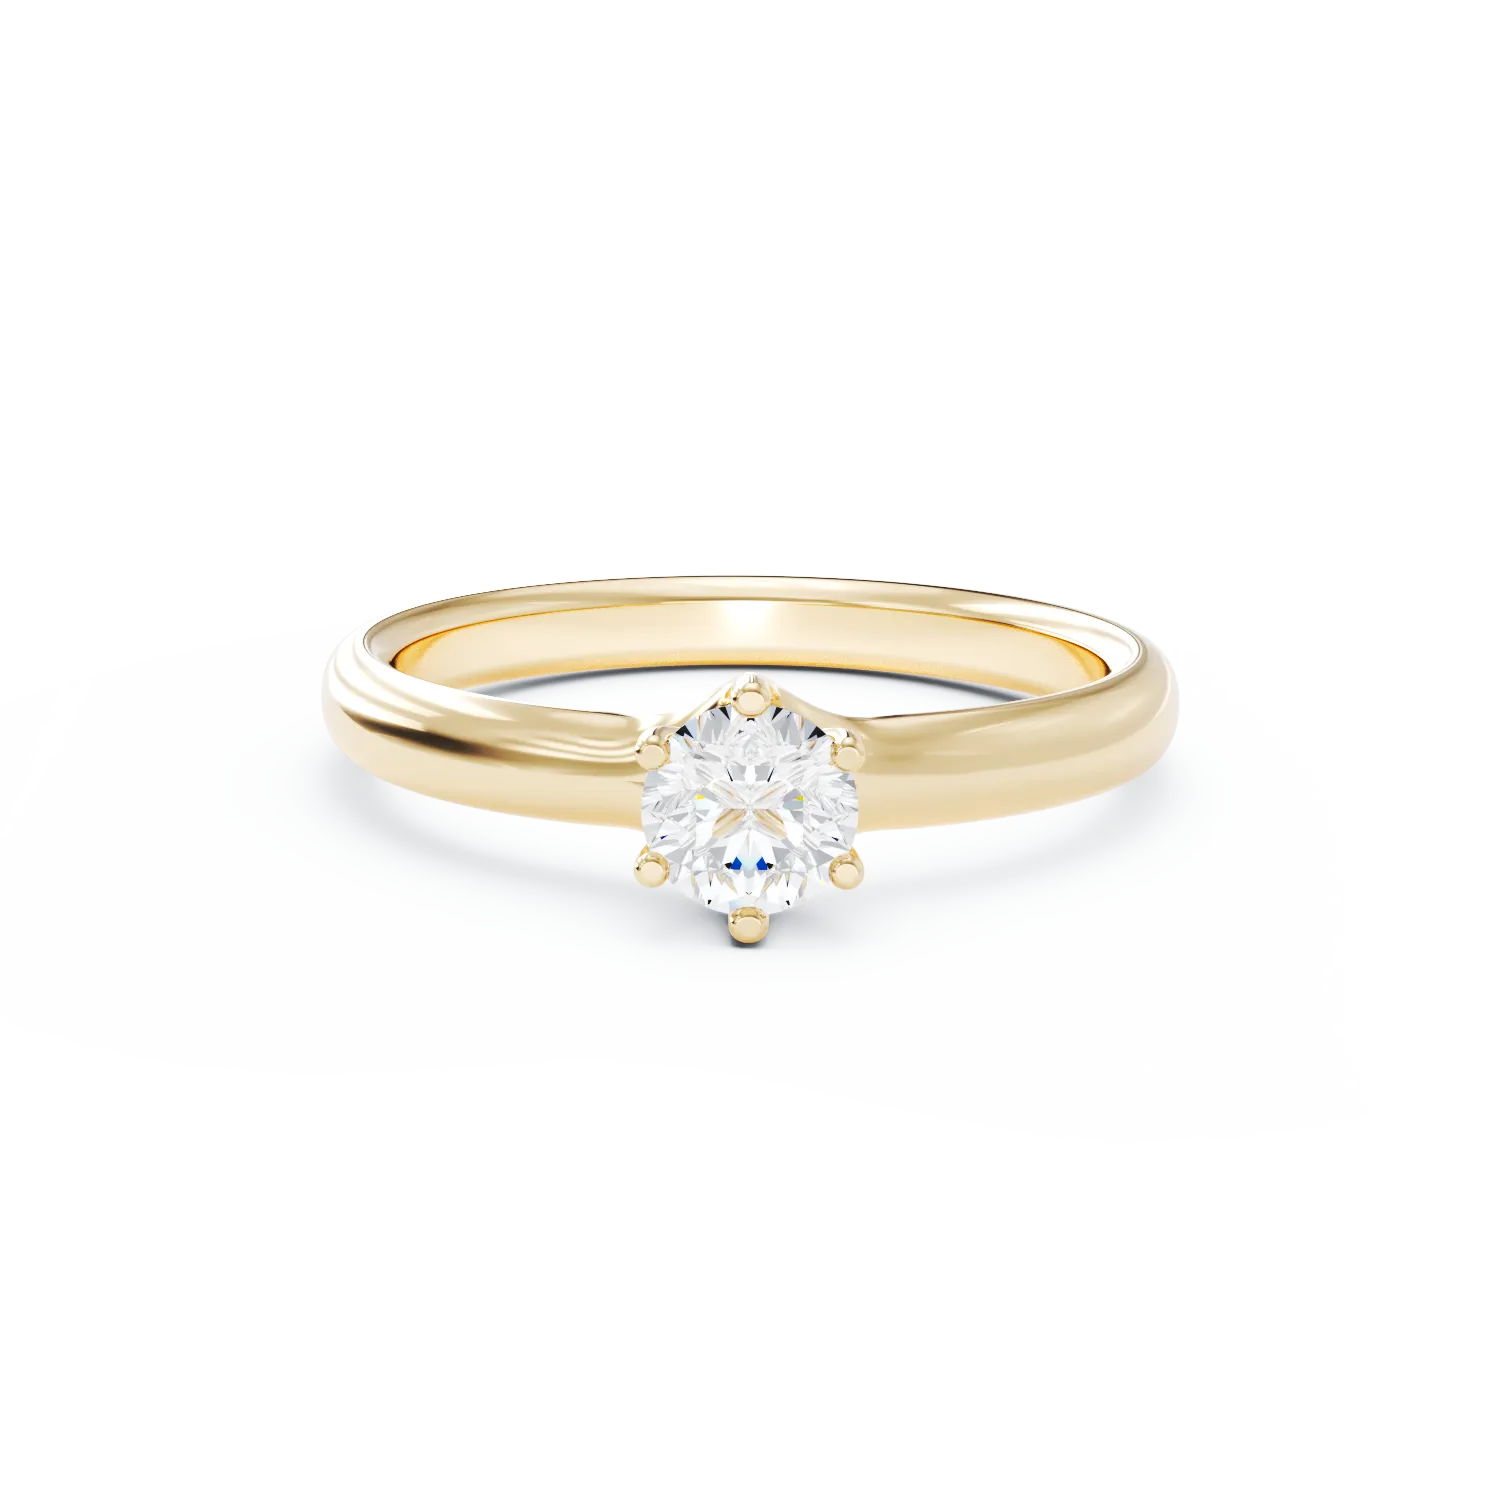 18K yellow gold engagement ring with a 0.41ct solitaire diamond